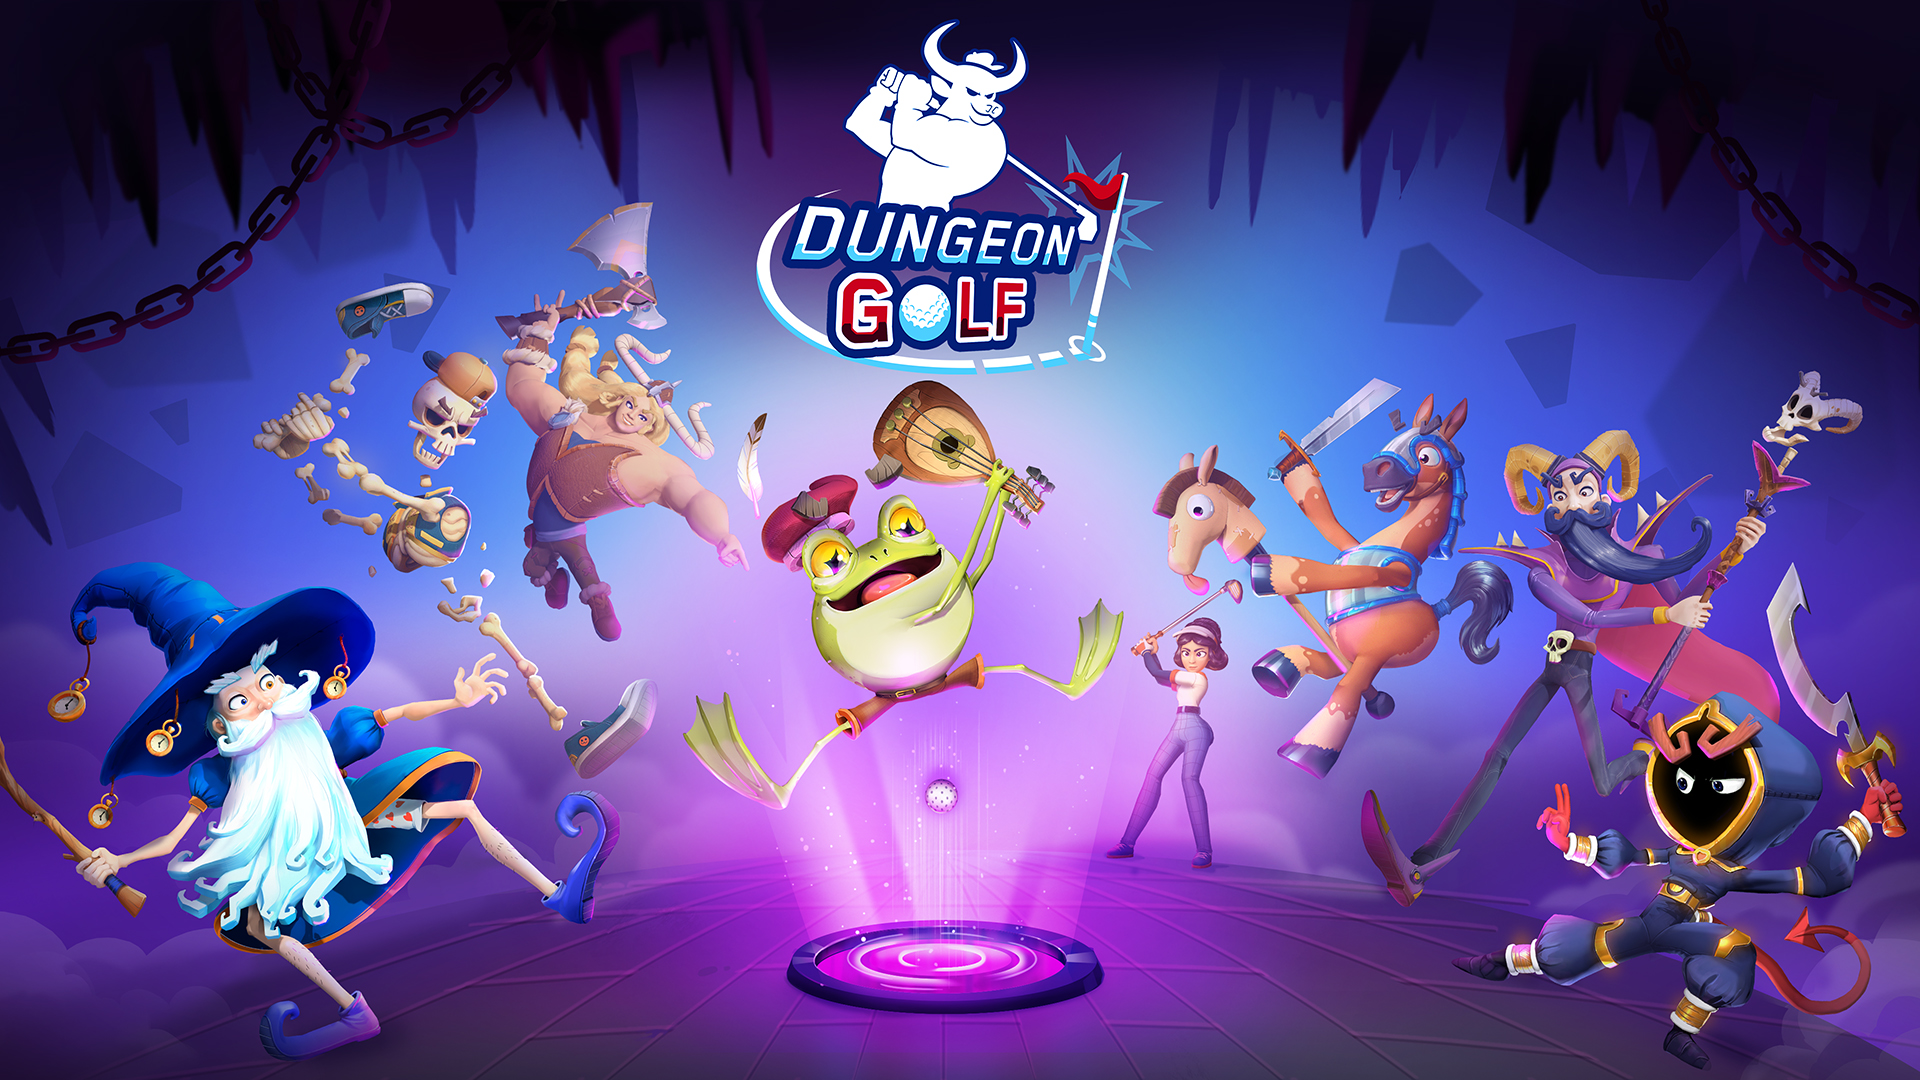 Chaotic multiplayer game Dungeon Golf launches via early access